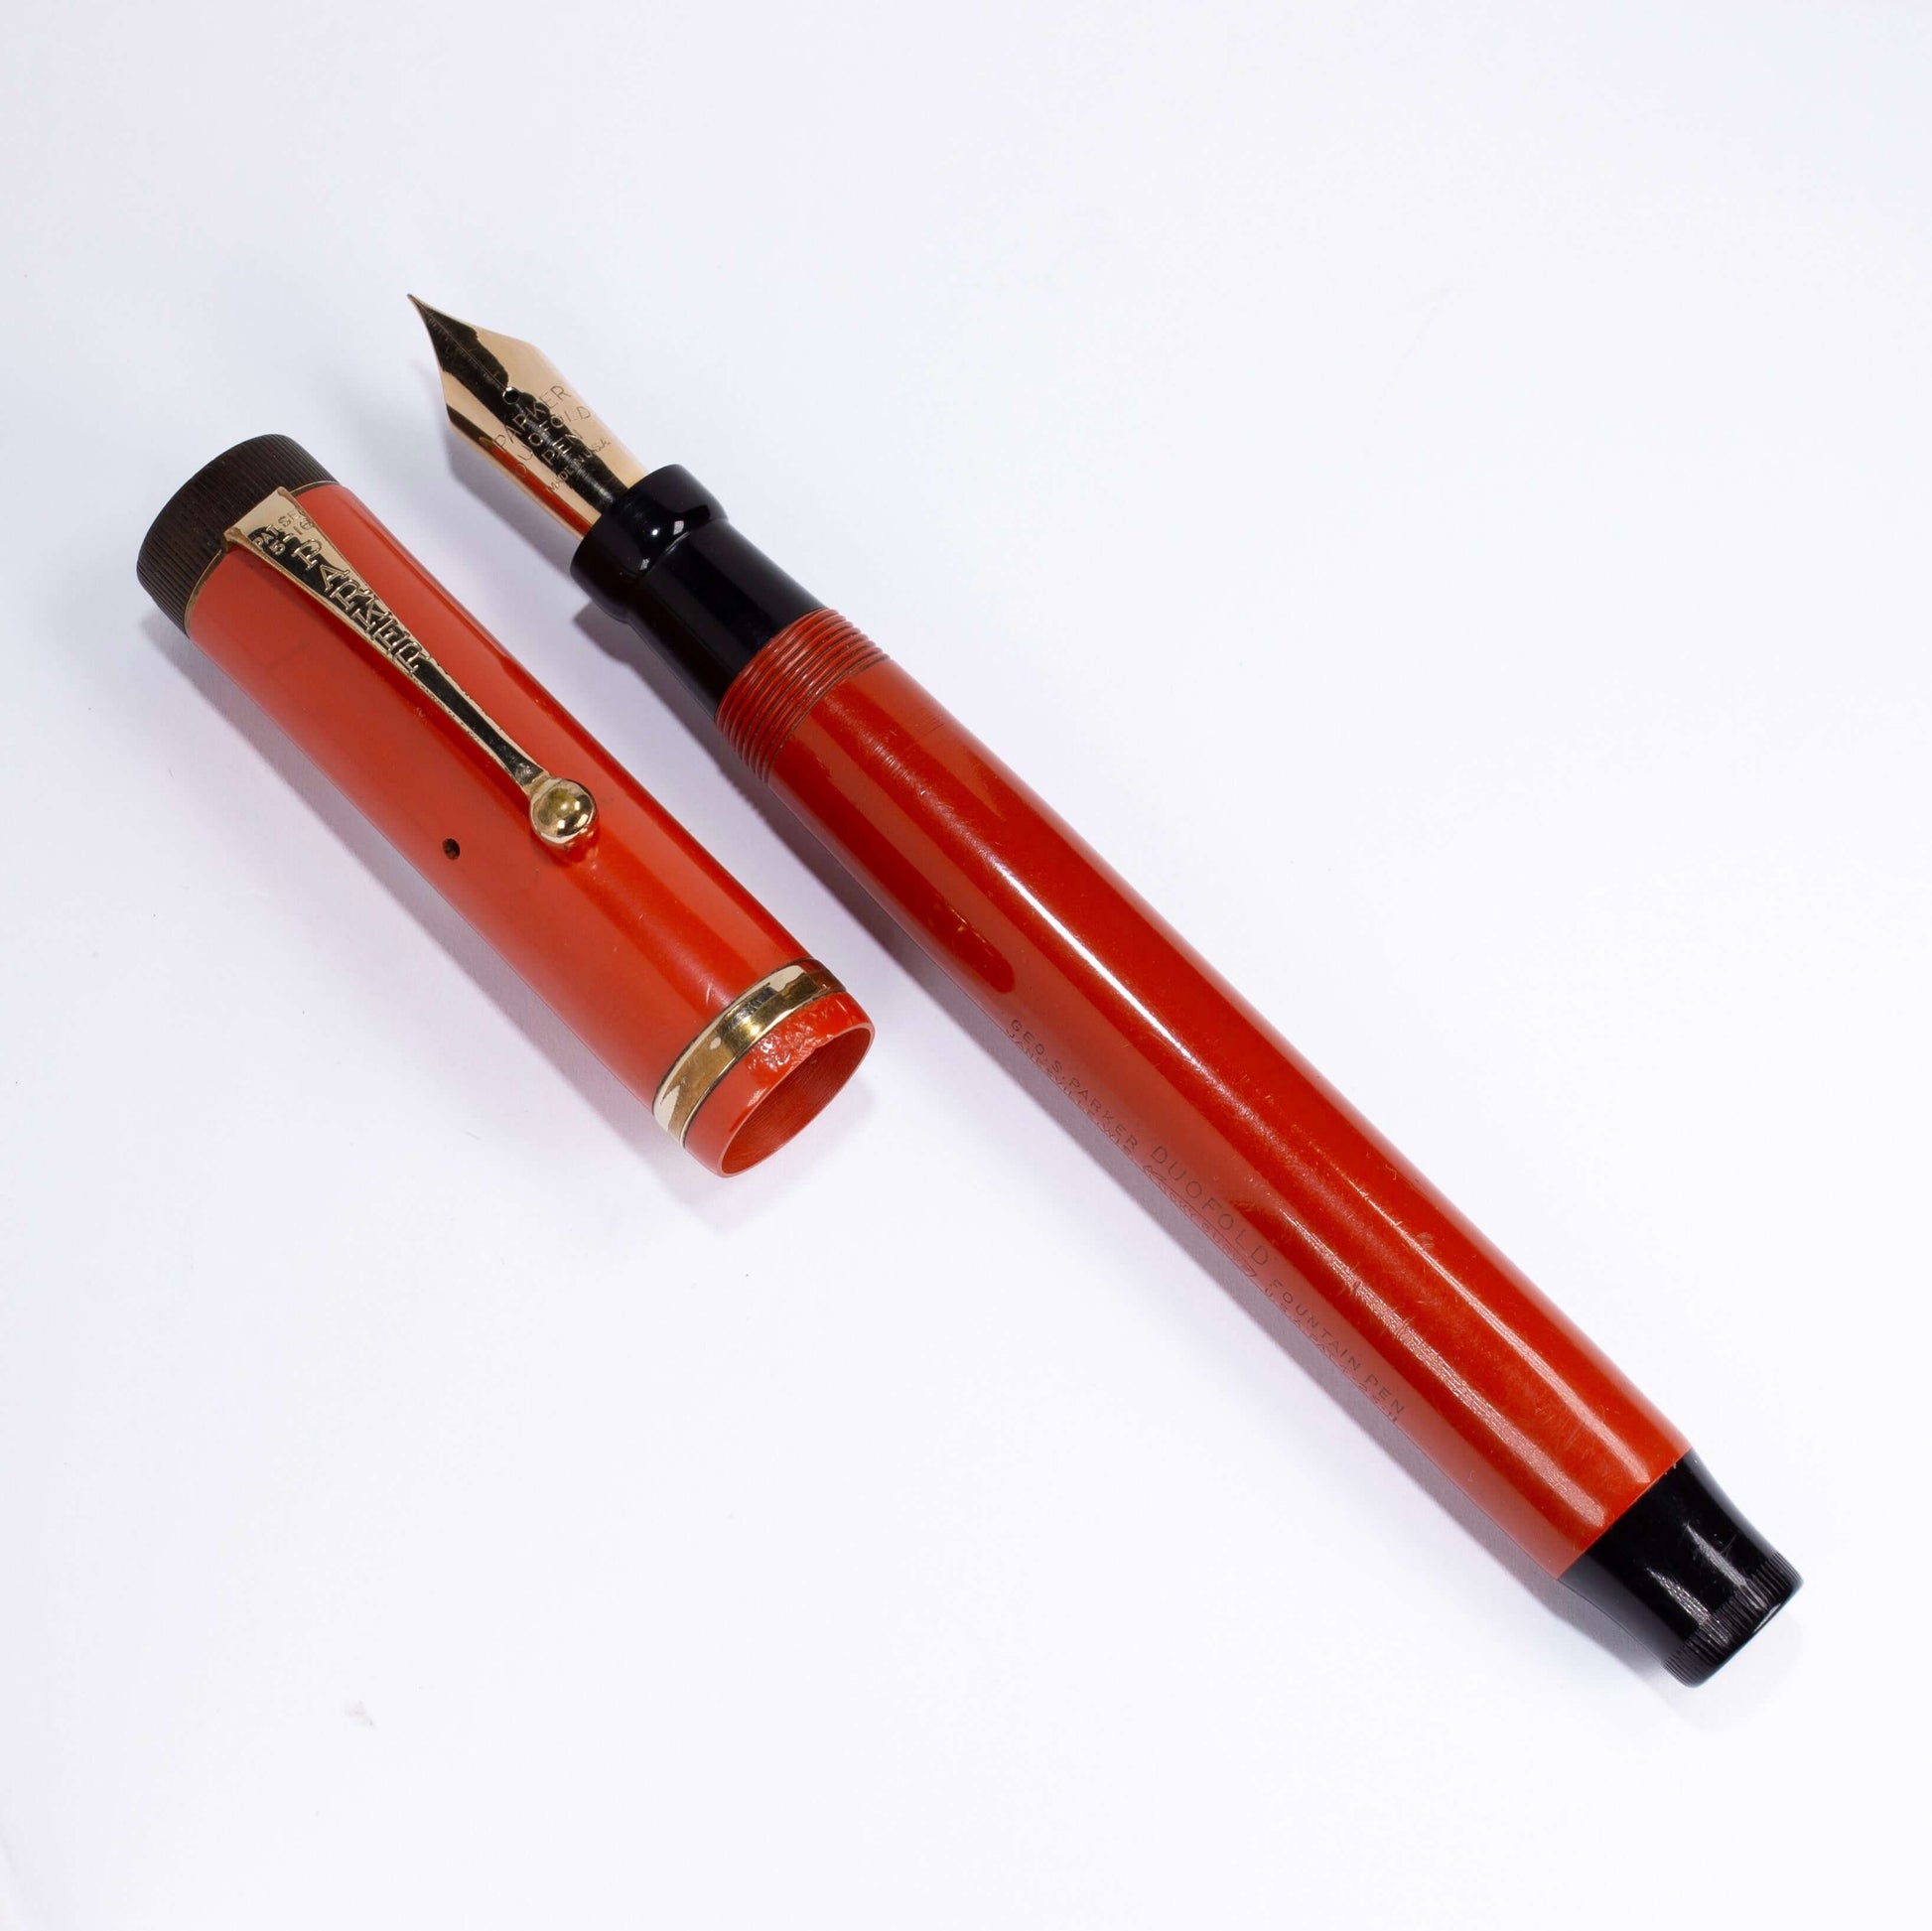 Parker Duofold Senior, Red Hard Rubber, Raised Cap Band, Button Fill, Large 14K Gold Duofold nib. Comes in original box with instruction sheet. Name/Type: Parker Senior Duofold Manufacture Year: 1920s Length: 5 1/2 Filling System: Button filler; Restored